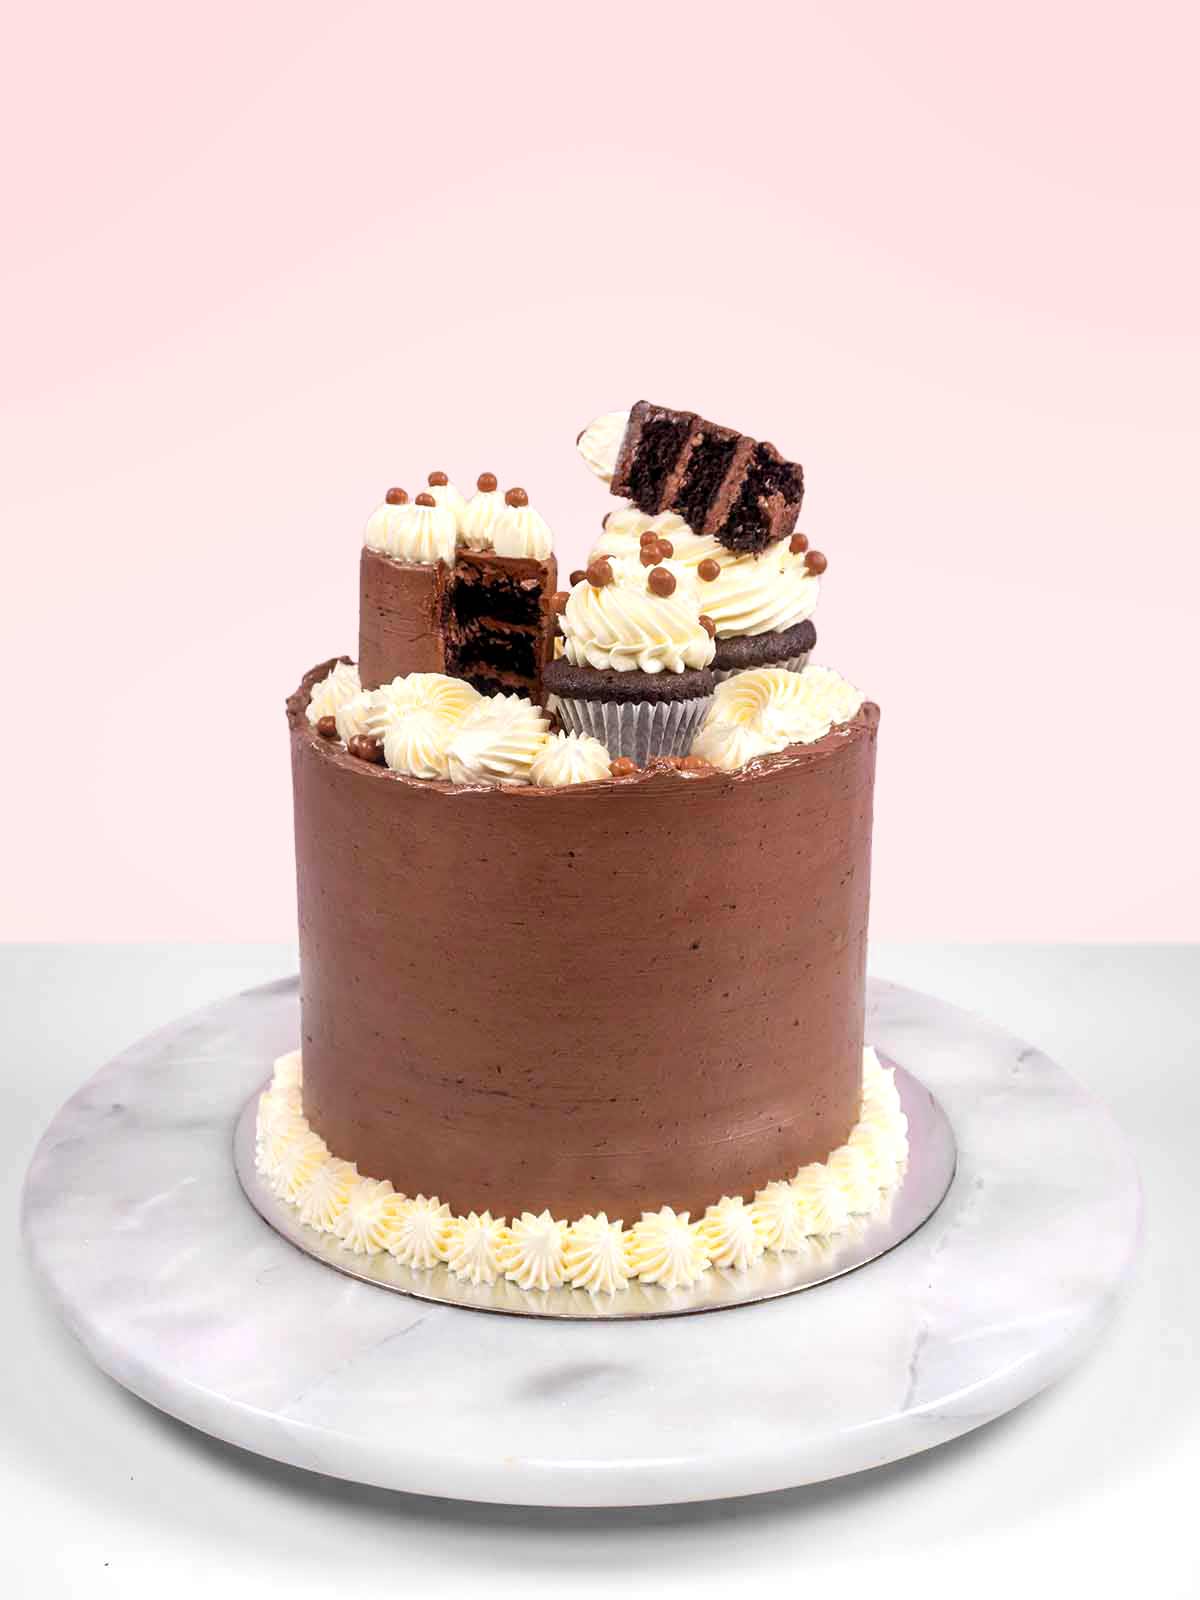 Interesting facts about chocolate cakes | Just Fun Facts